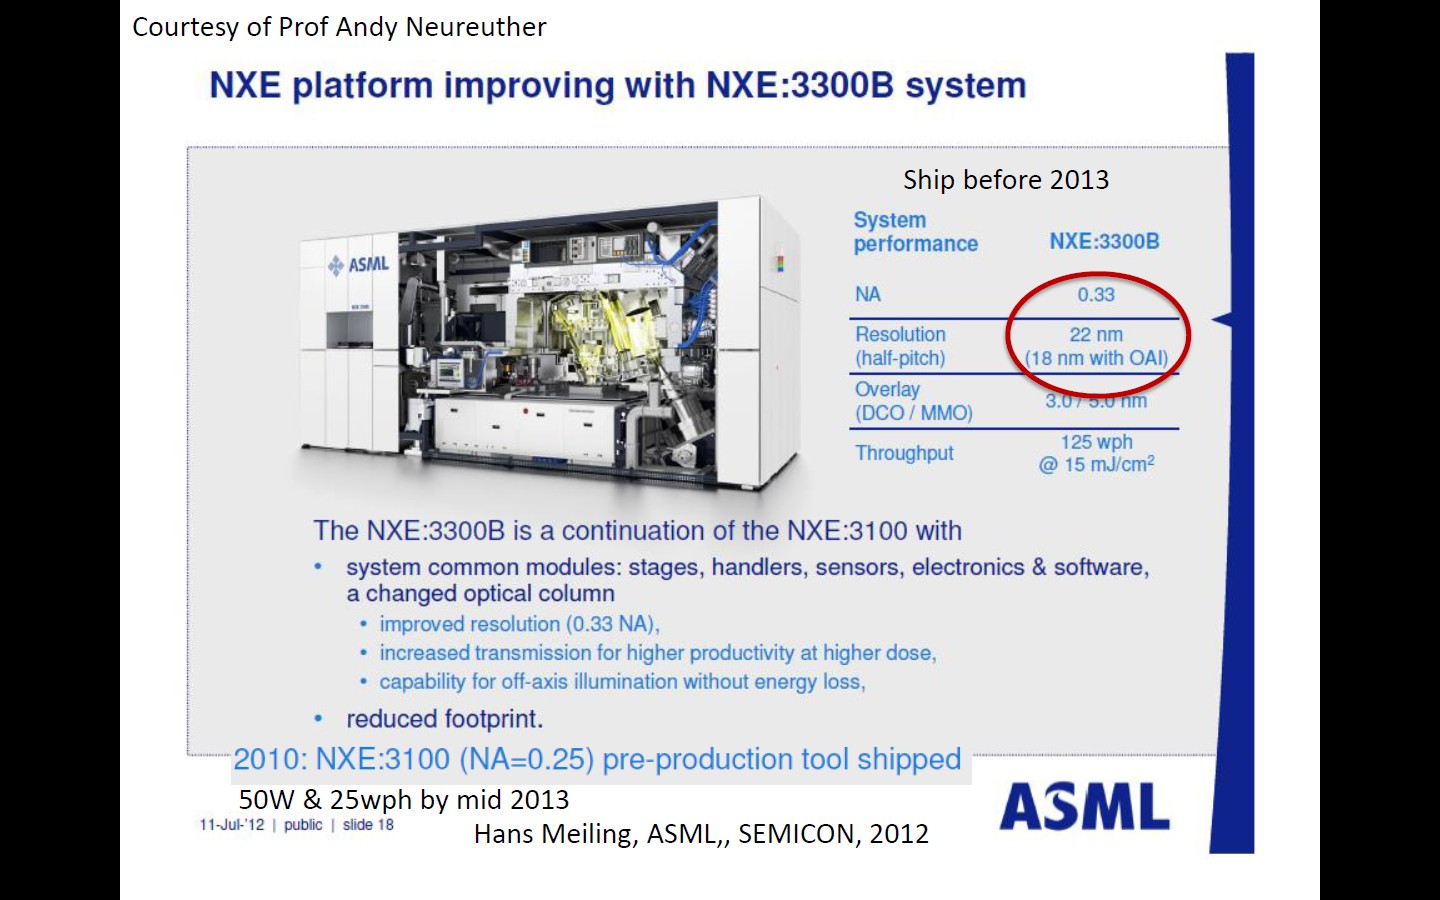 NXE platform improving with NXE:3300B system